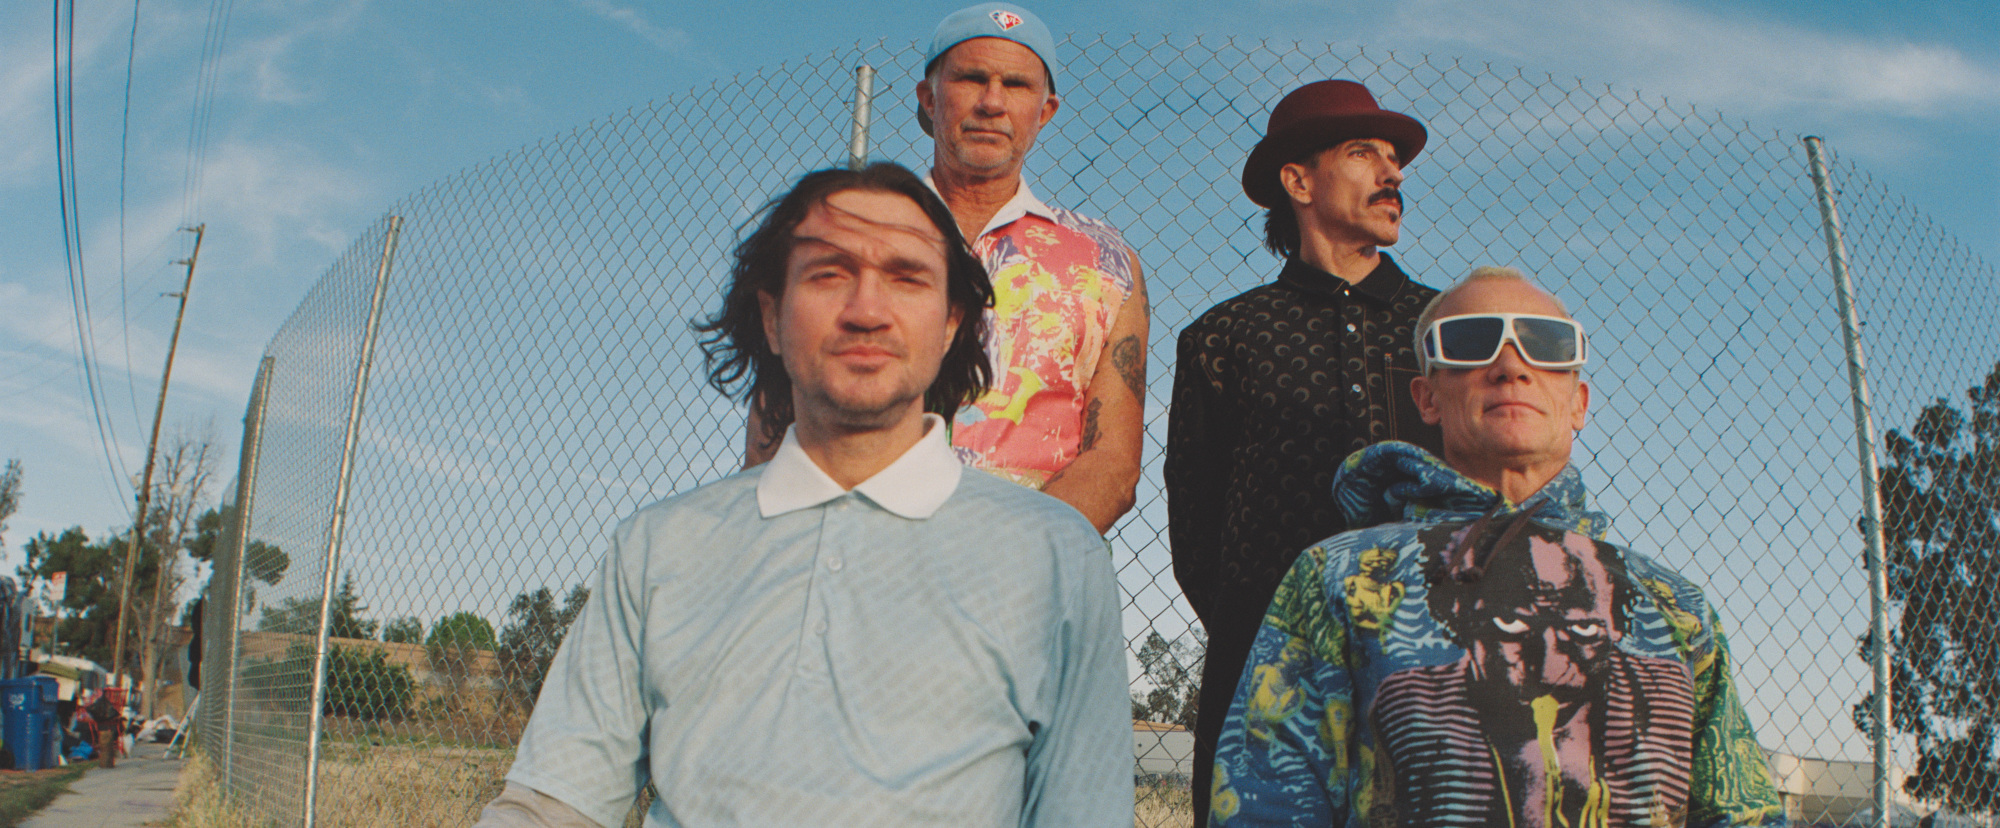 Red Hot Chili Peppers Release Second Album of 2022 ‘Return of the Dream Canteen’